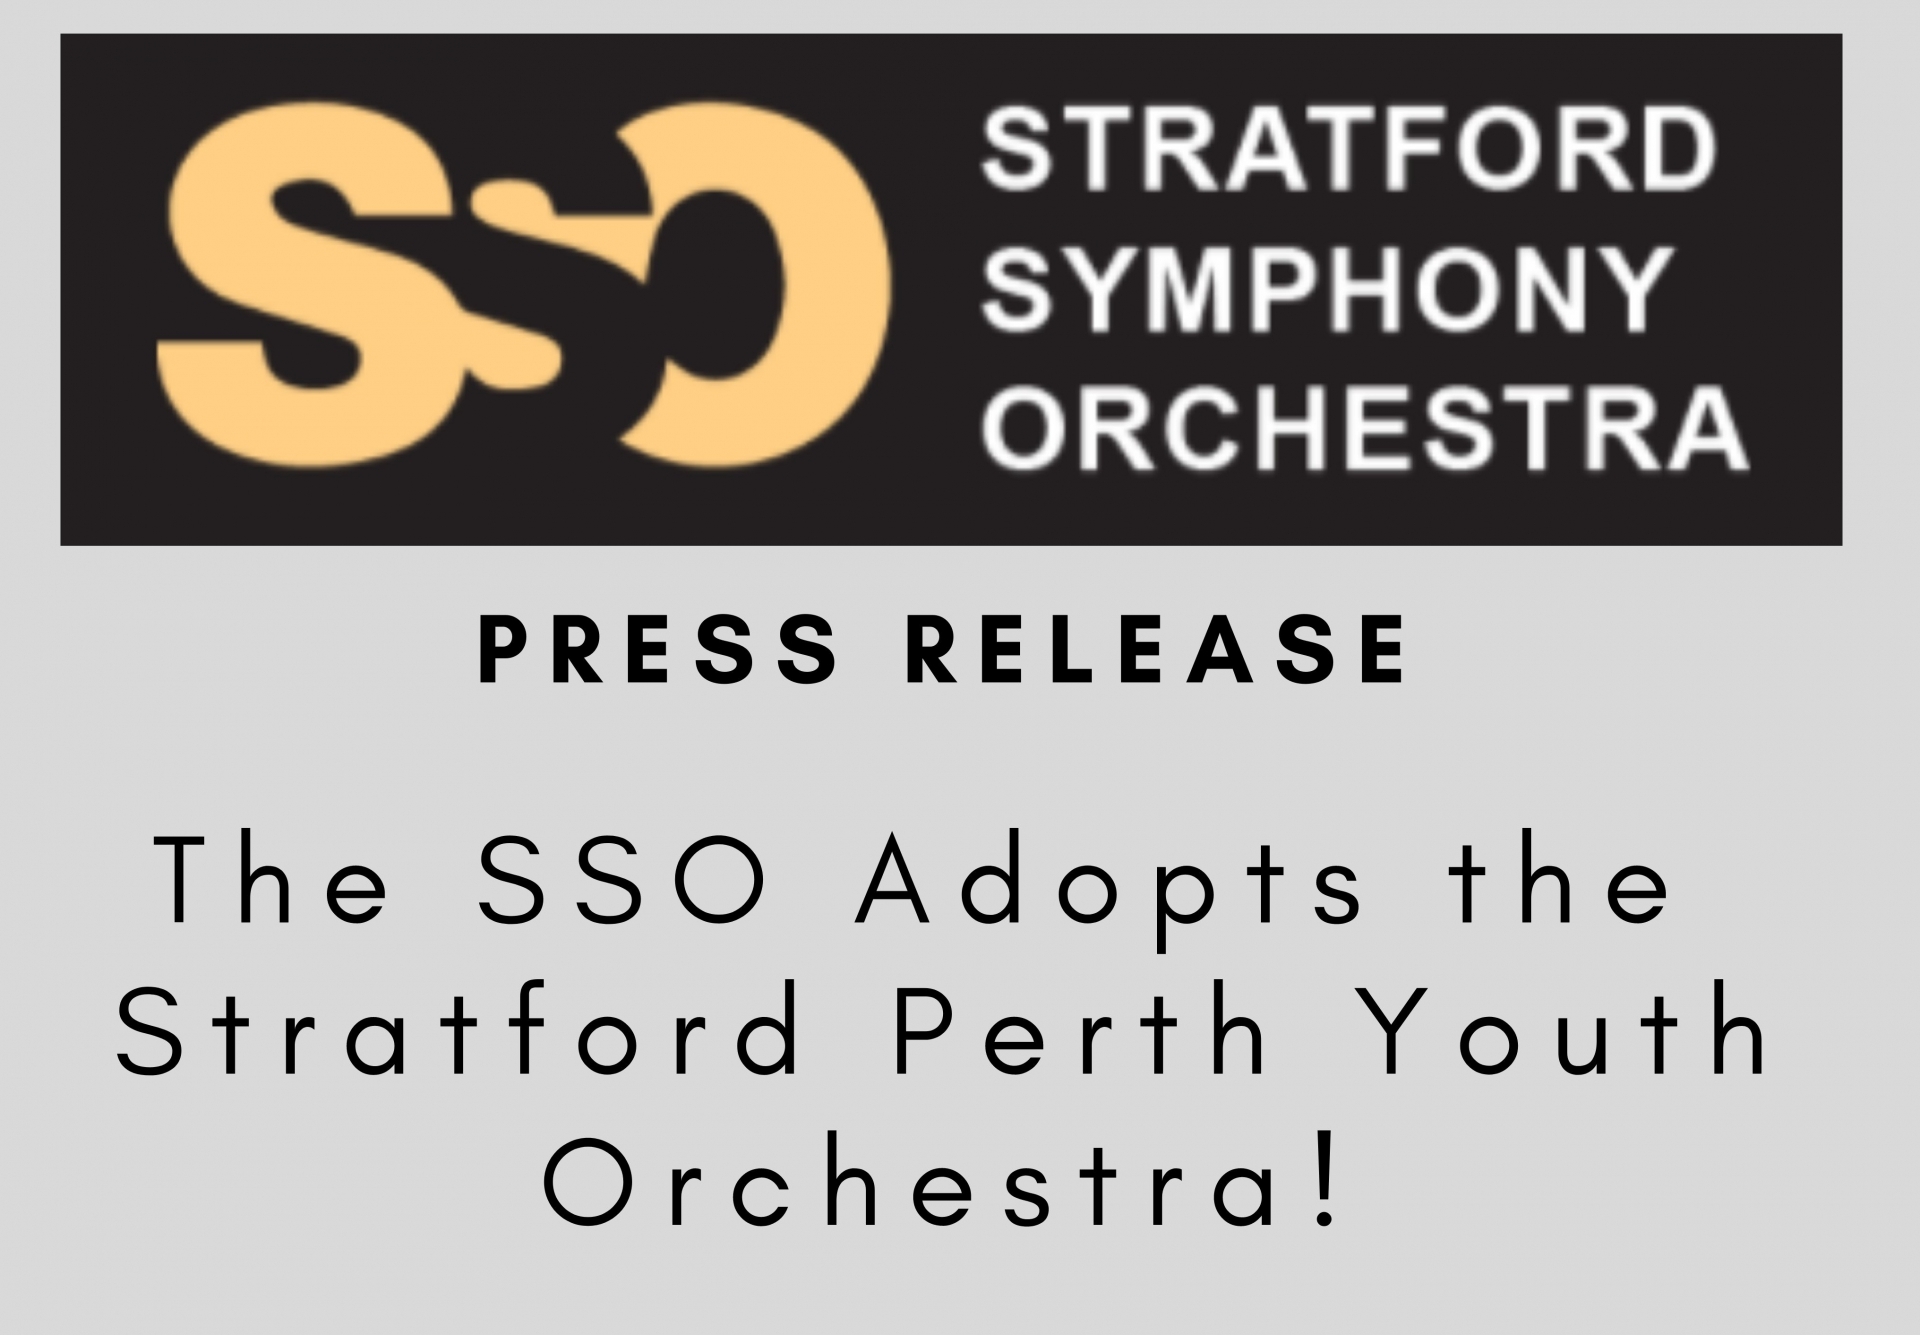 The SSO Adopts the Stratford Perth Youth  Orchestra!